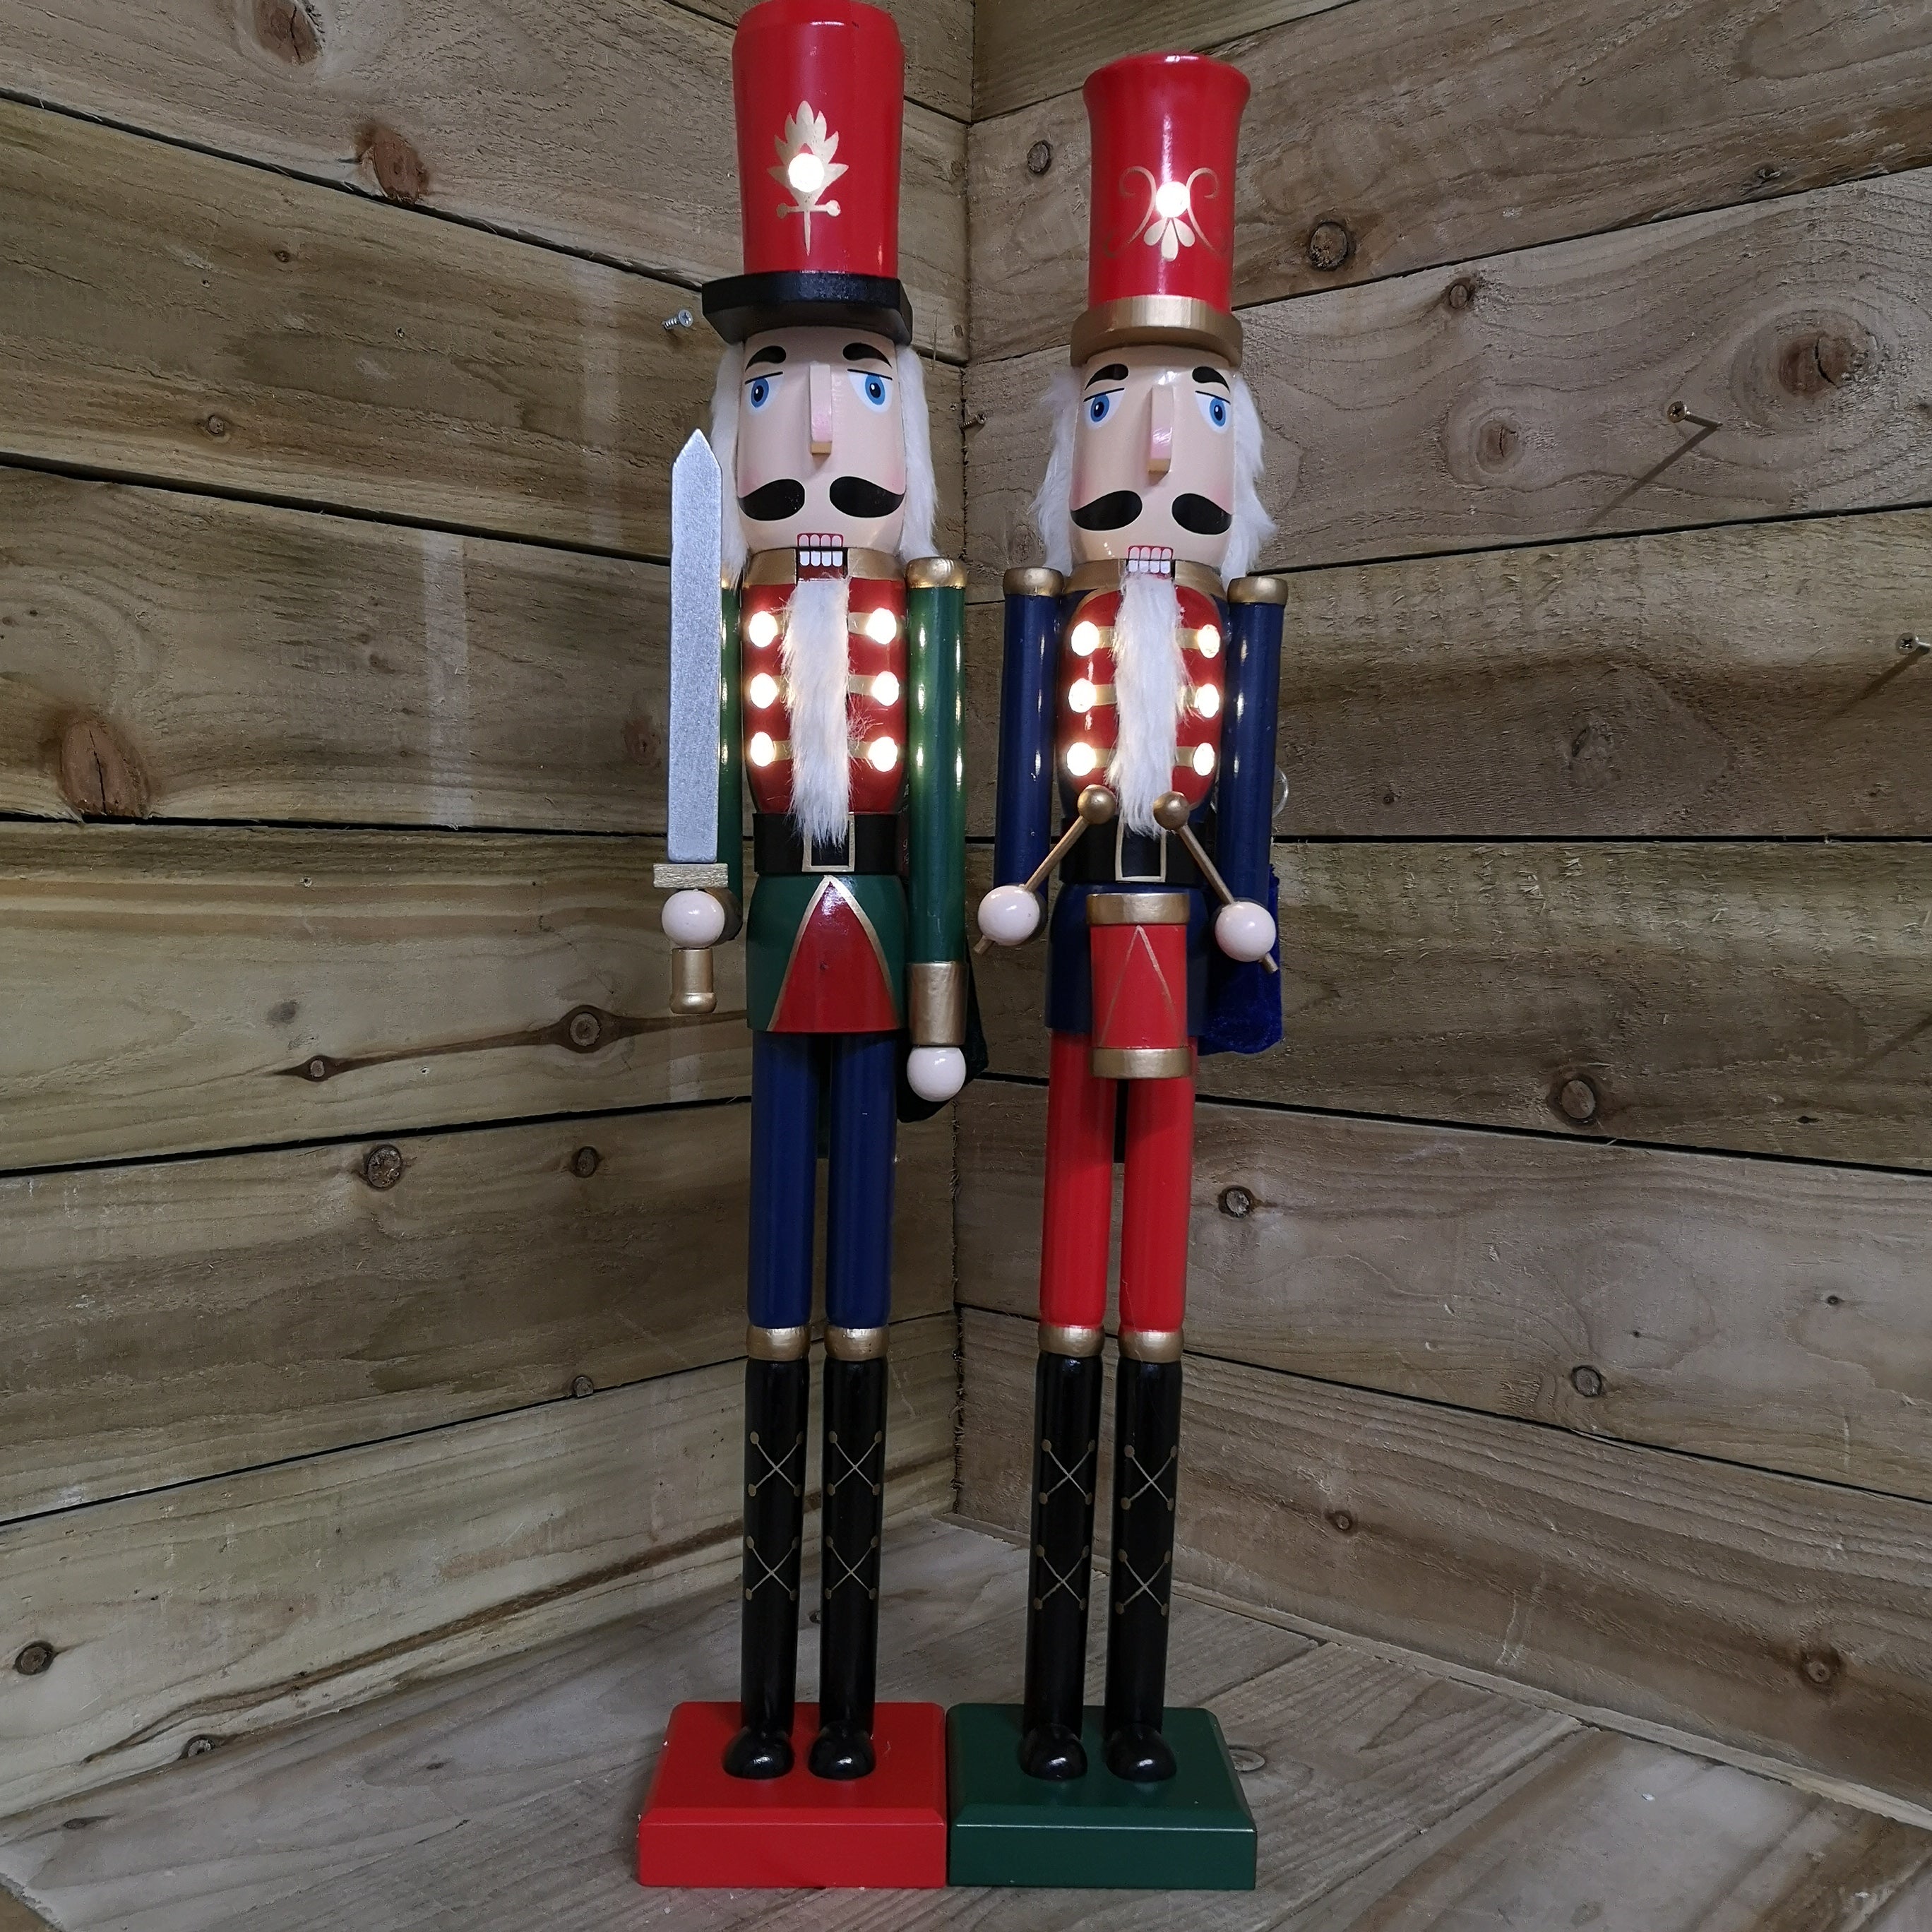 76cm LED Battery Operated Indoor Christmas Wooden Nutcracker Decoration - Choice of 2 designs